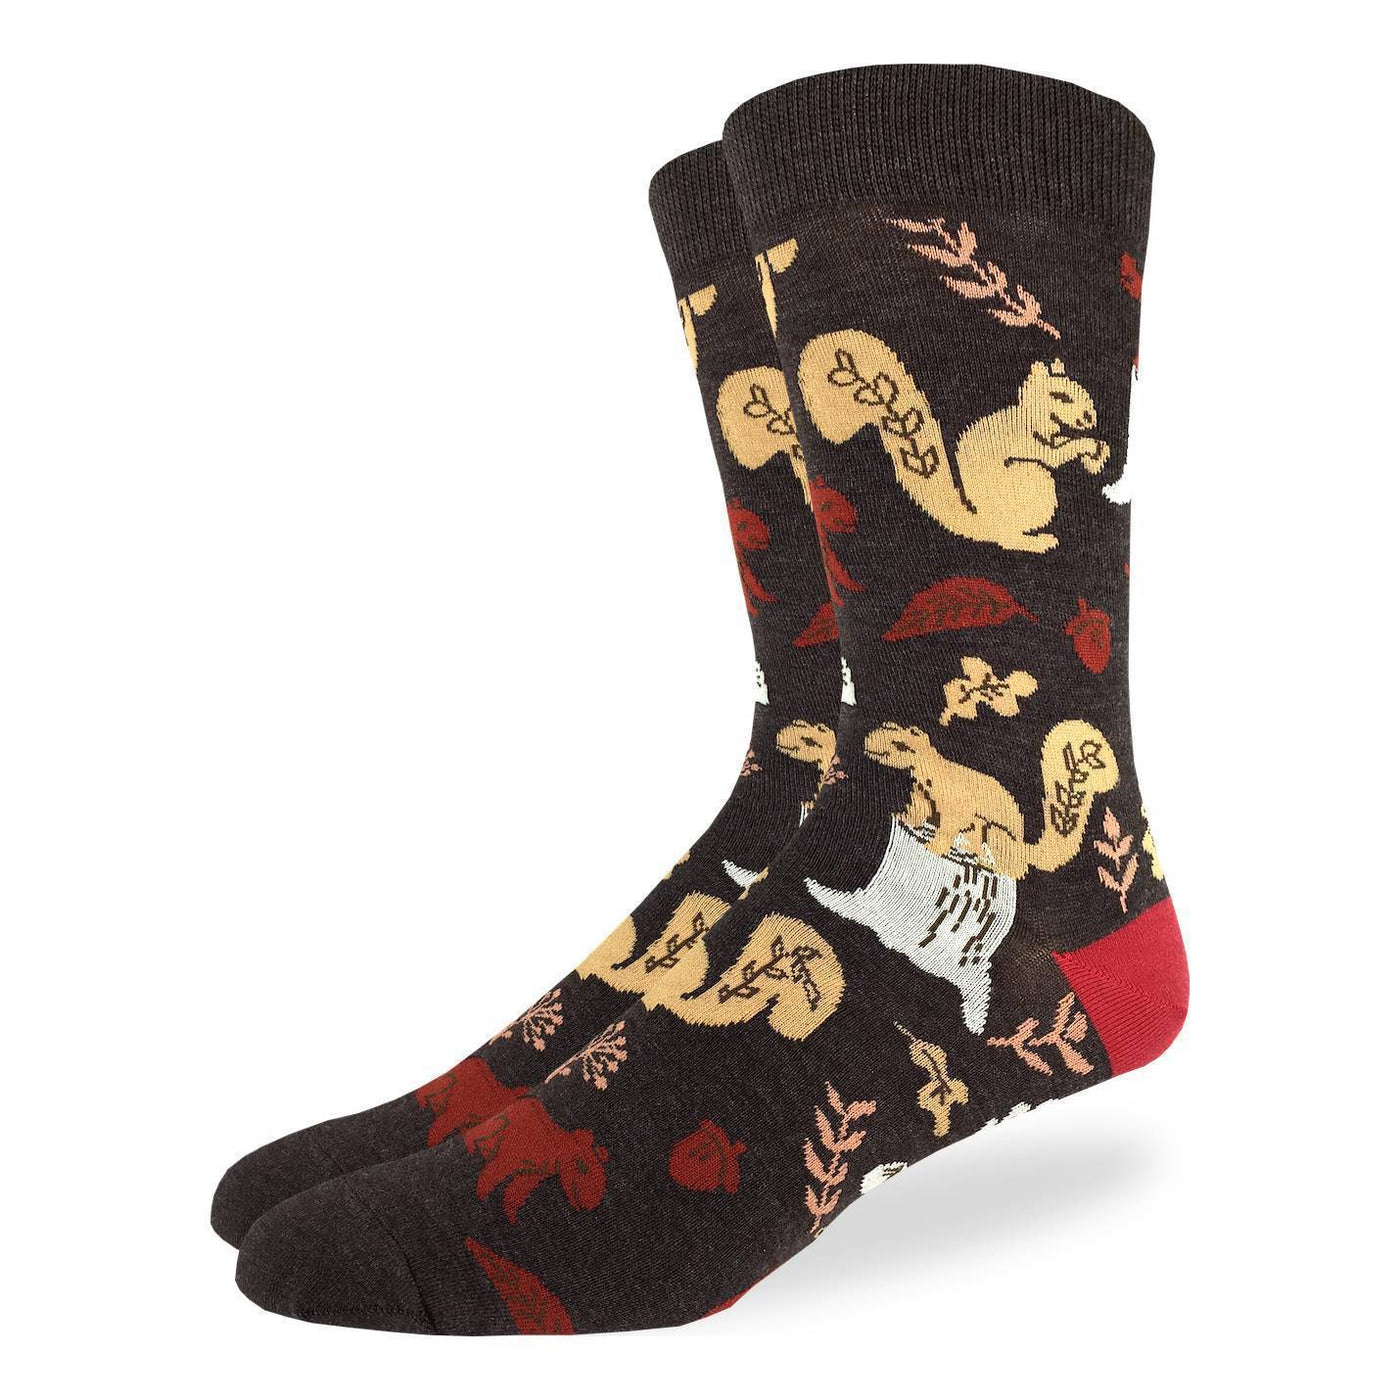 "Woodland Squirrel" Cotton Crew Socks by Good Luck Sock